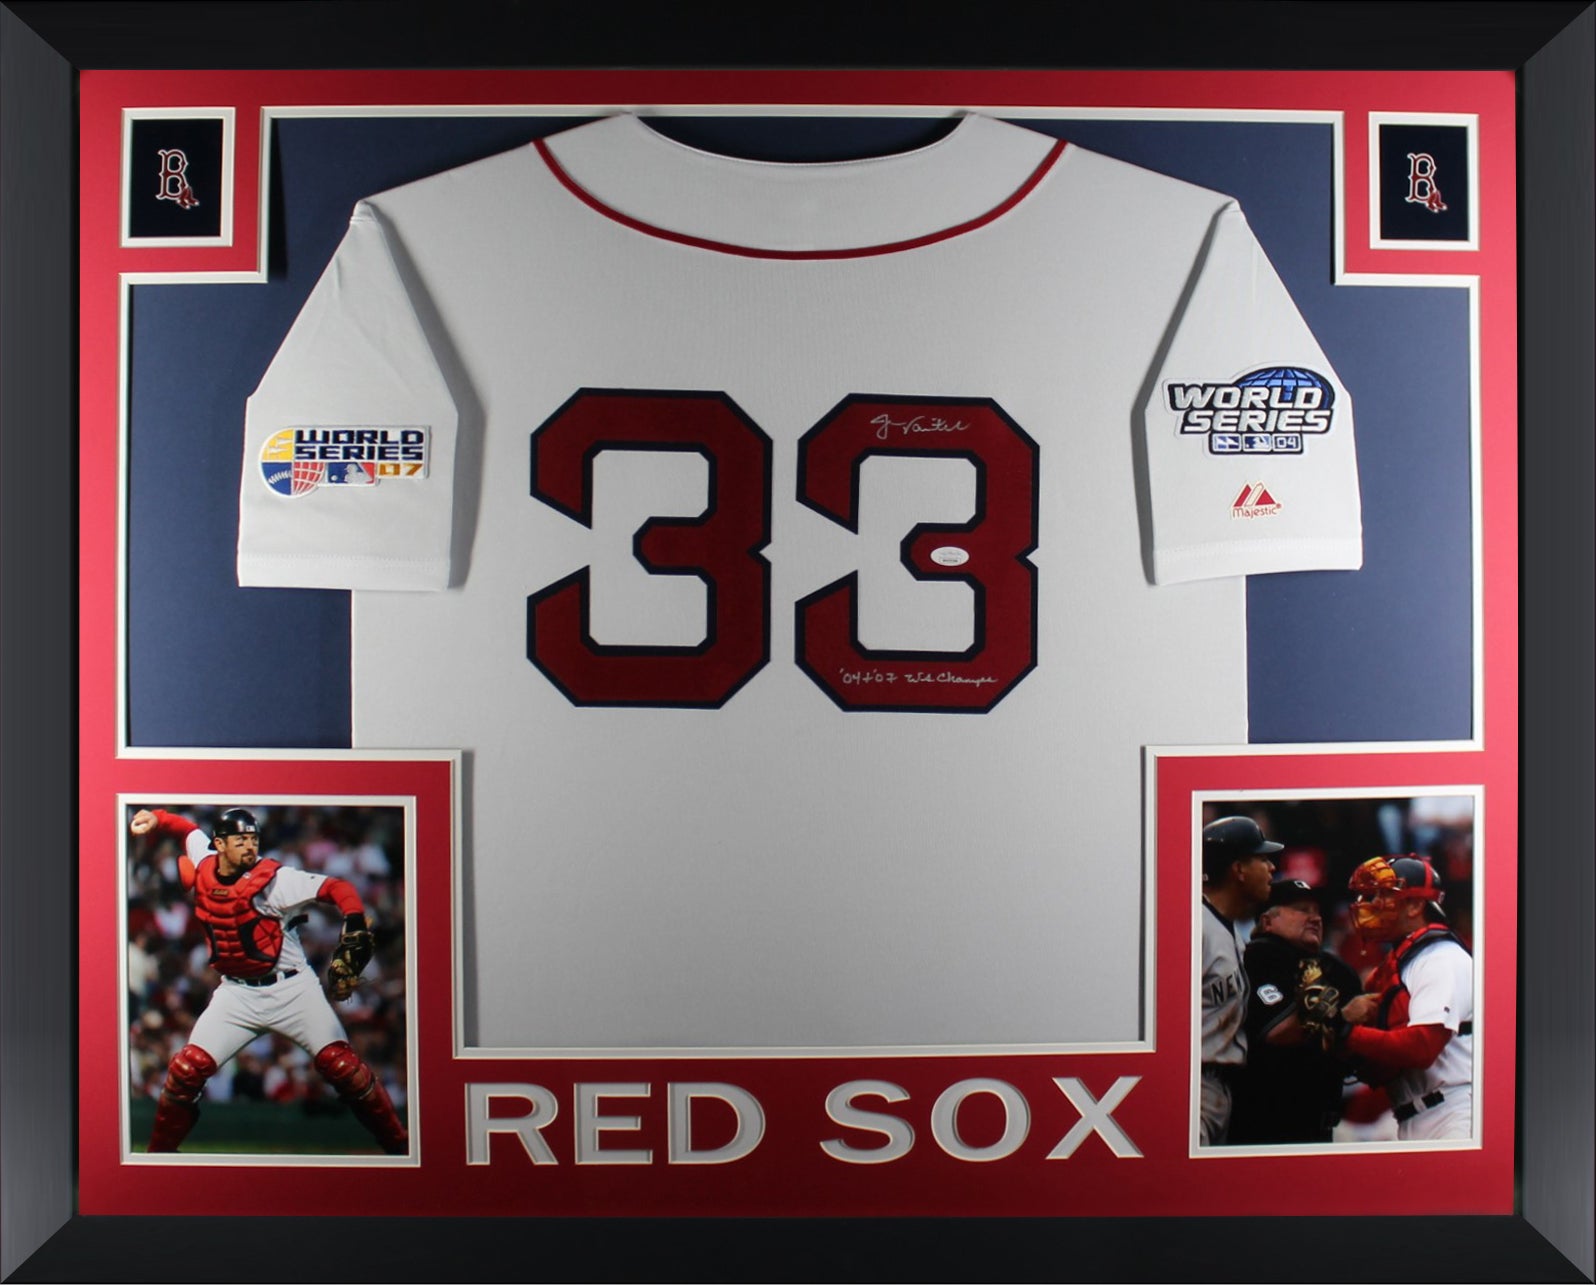 Boston Red Sox 2018 World Series Team Autographed Jersey - signed by 23